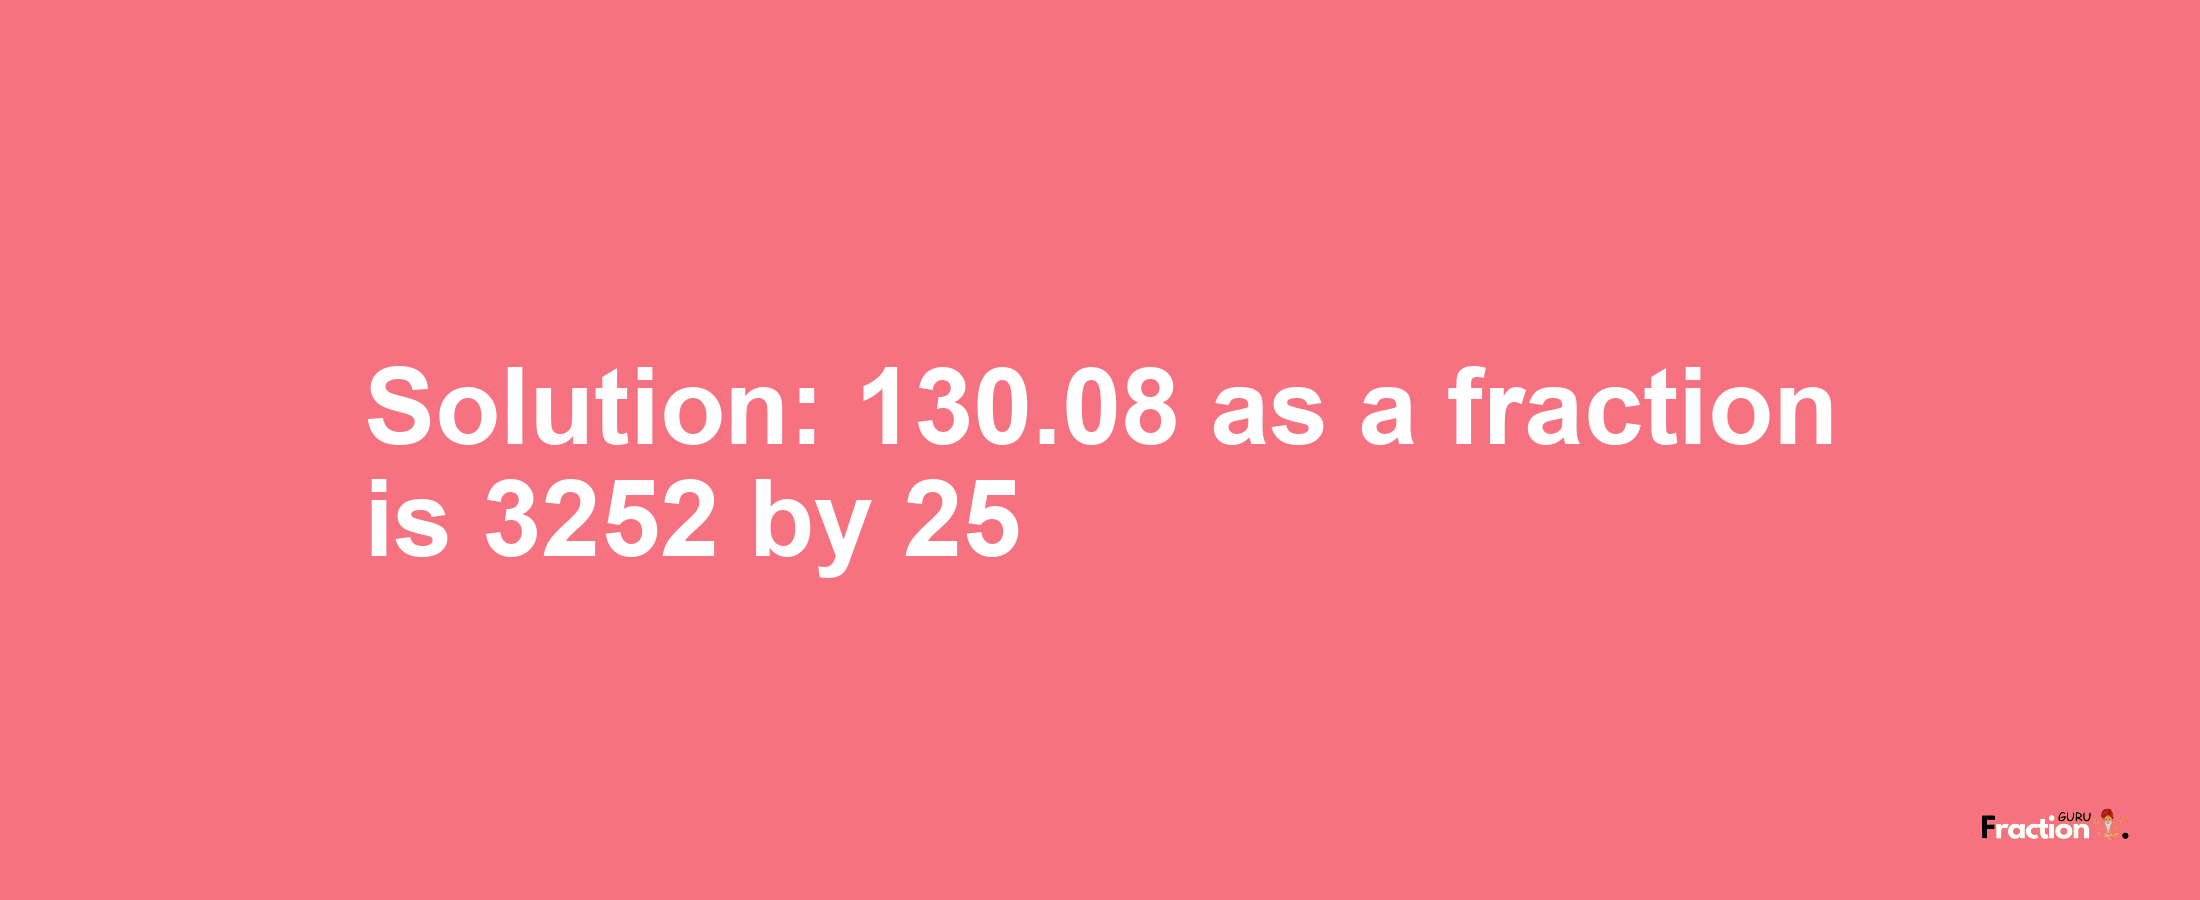 Solution:130.08 as a fraction is 3252/25